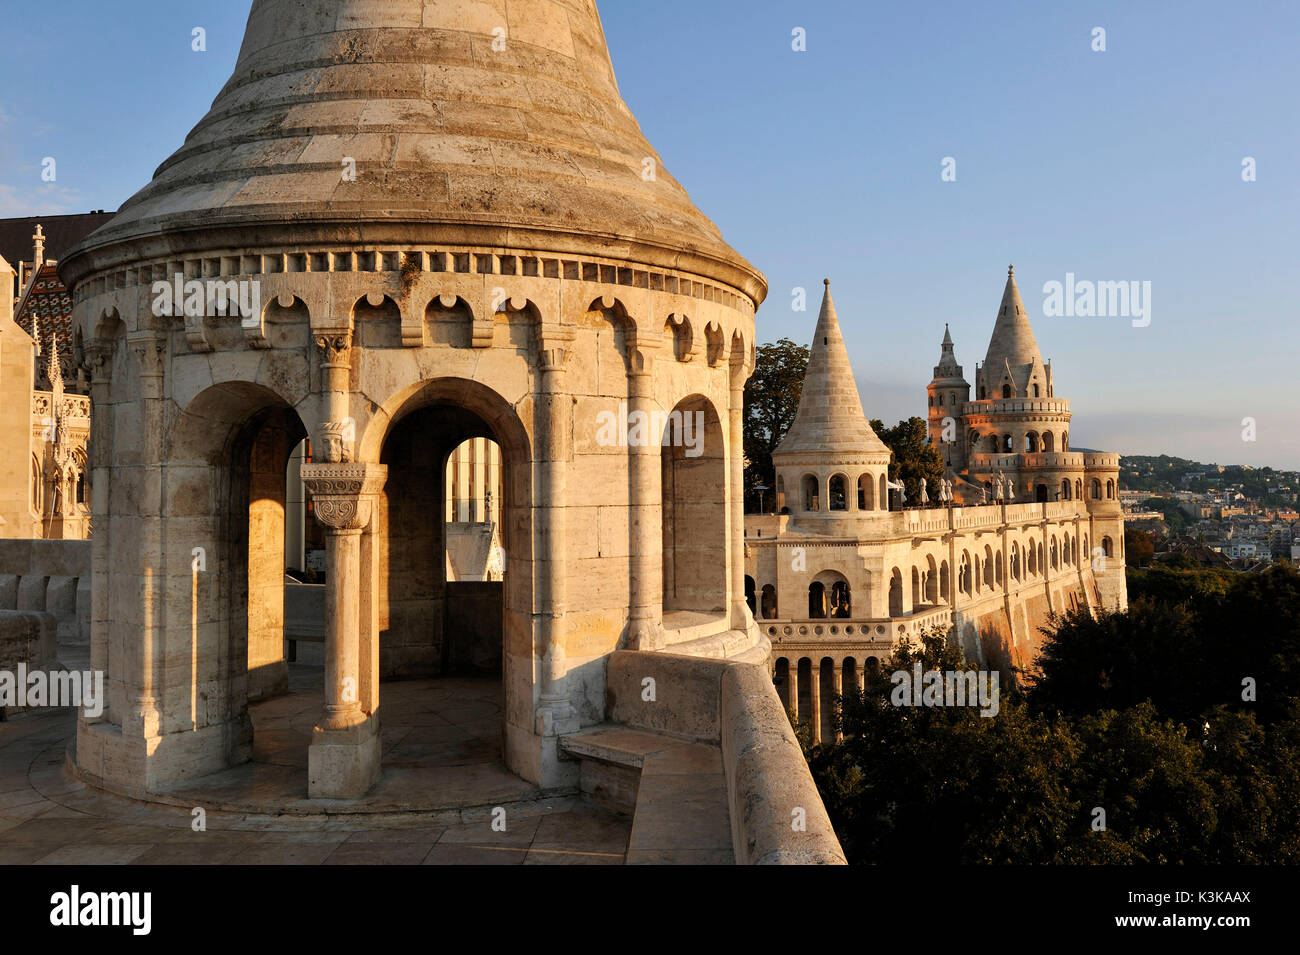 Hungary, Budapest, Fisherman's Bastion - end of 19th century located in the historical Buda Castle district listed as World Heritage by UNESCO Stock Photo